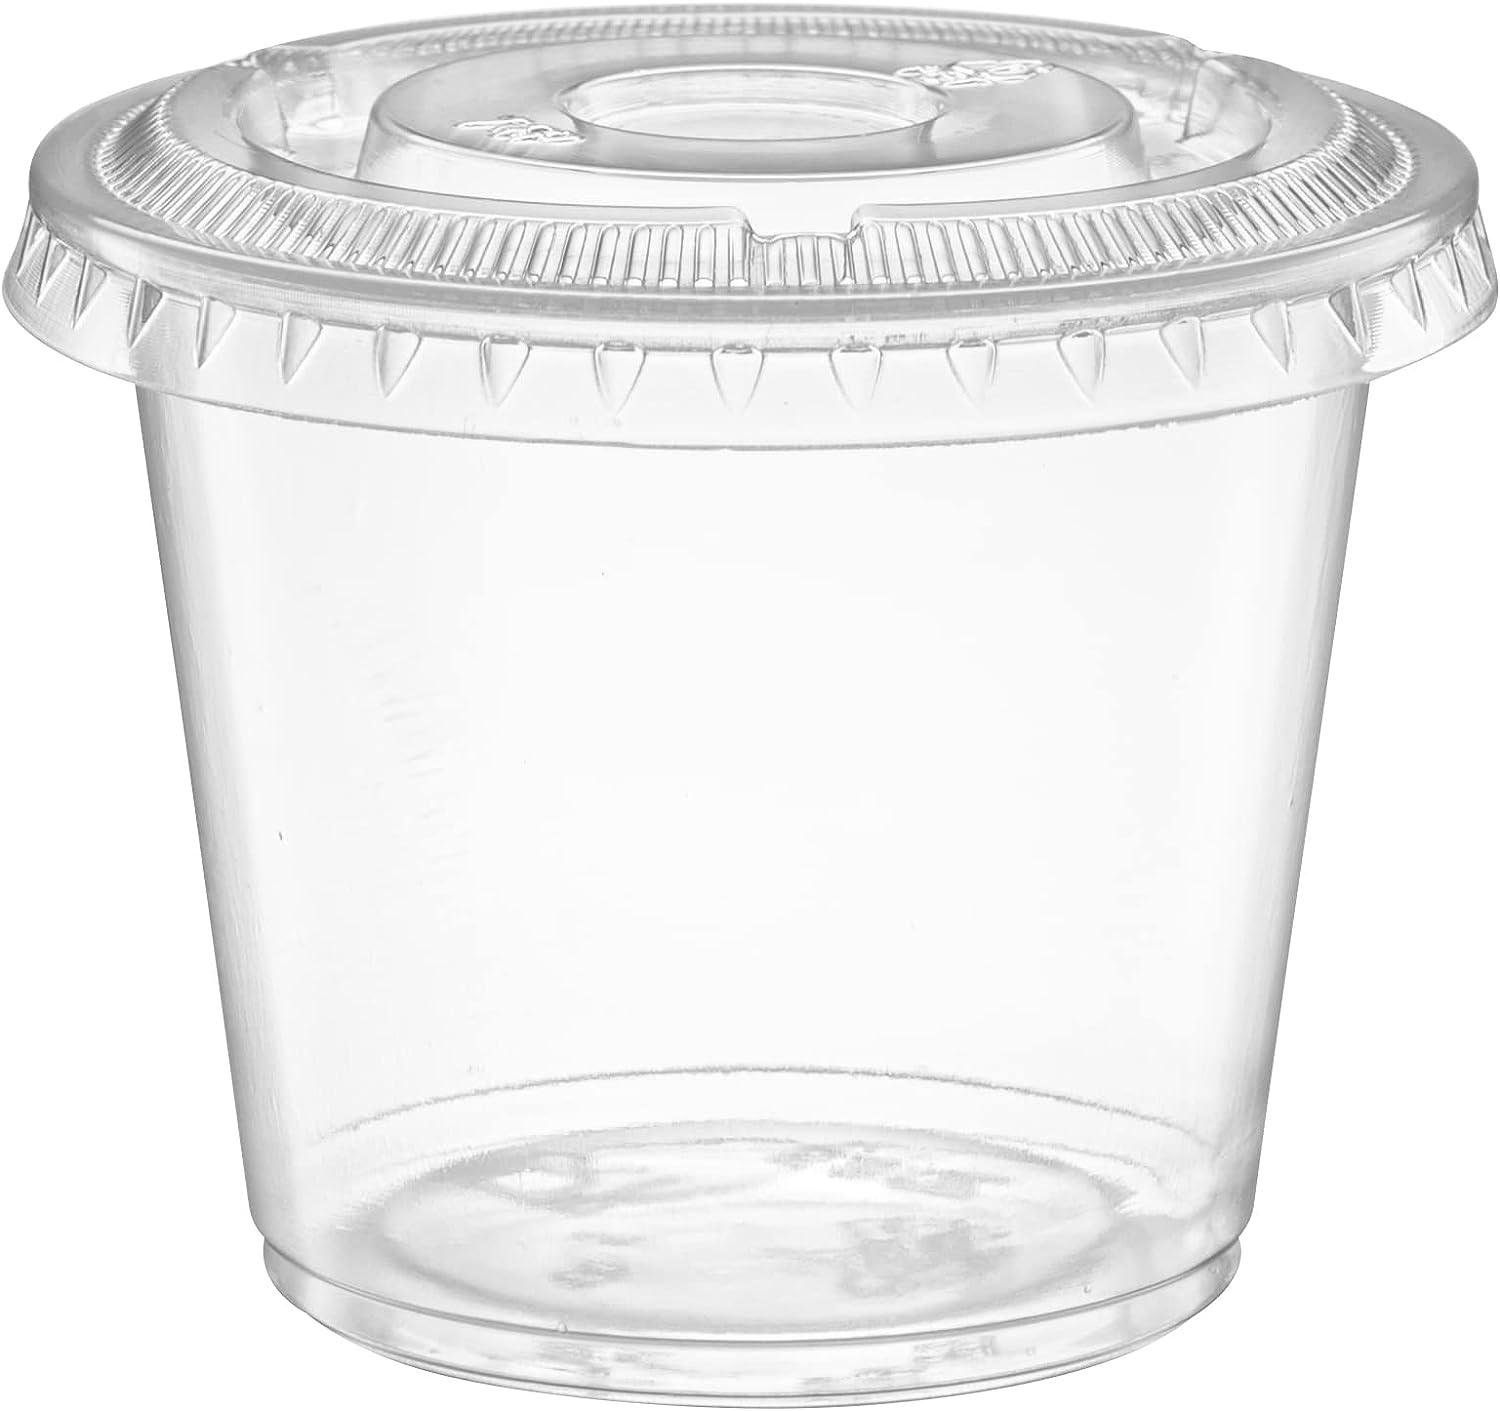 Futura 5 oz Clear Plastic Sauce Container - with Hinged Lid, 2-Compartment,  Microwavable - 4 x 3 1/4 x 1 - 500 count box.